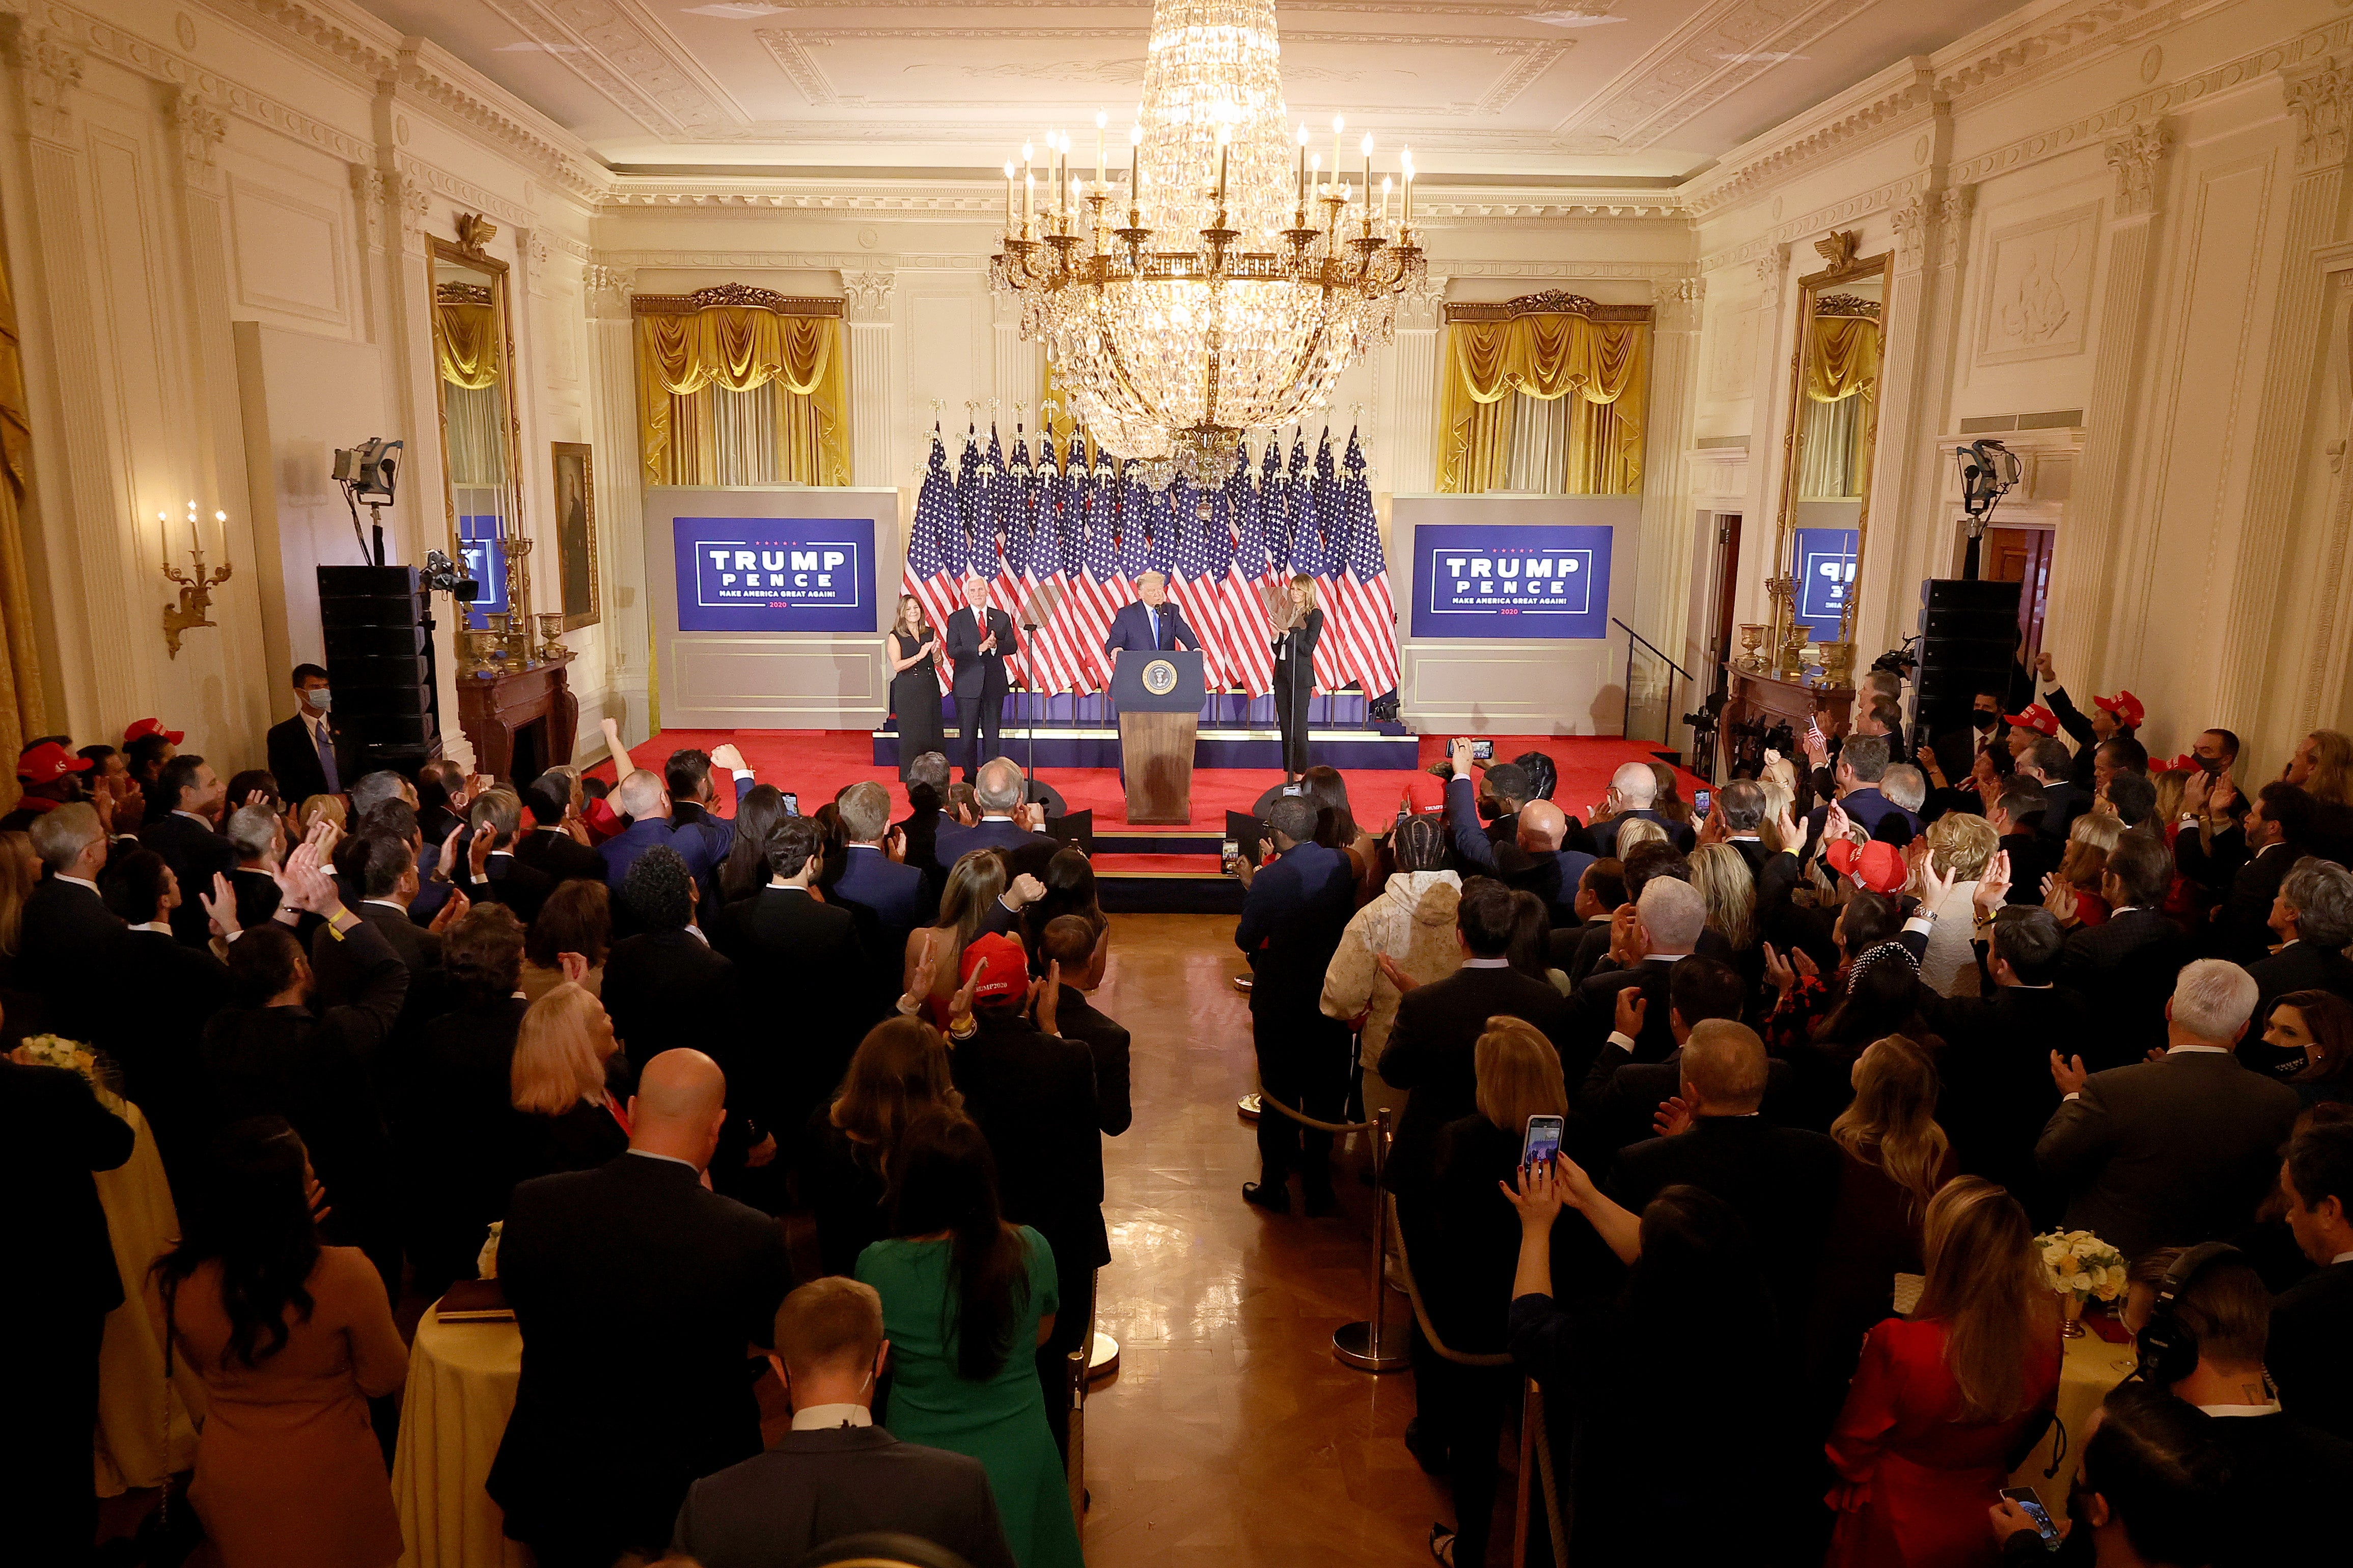 Election night in the East Room of the White House, now thought to be a superspreader event at which many senior members of the administration were present